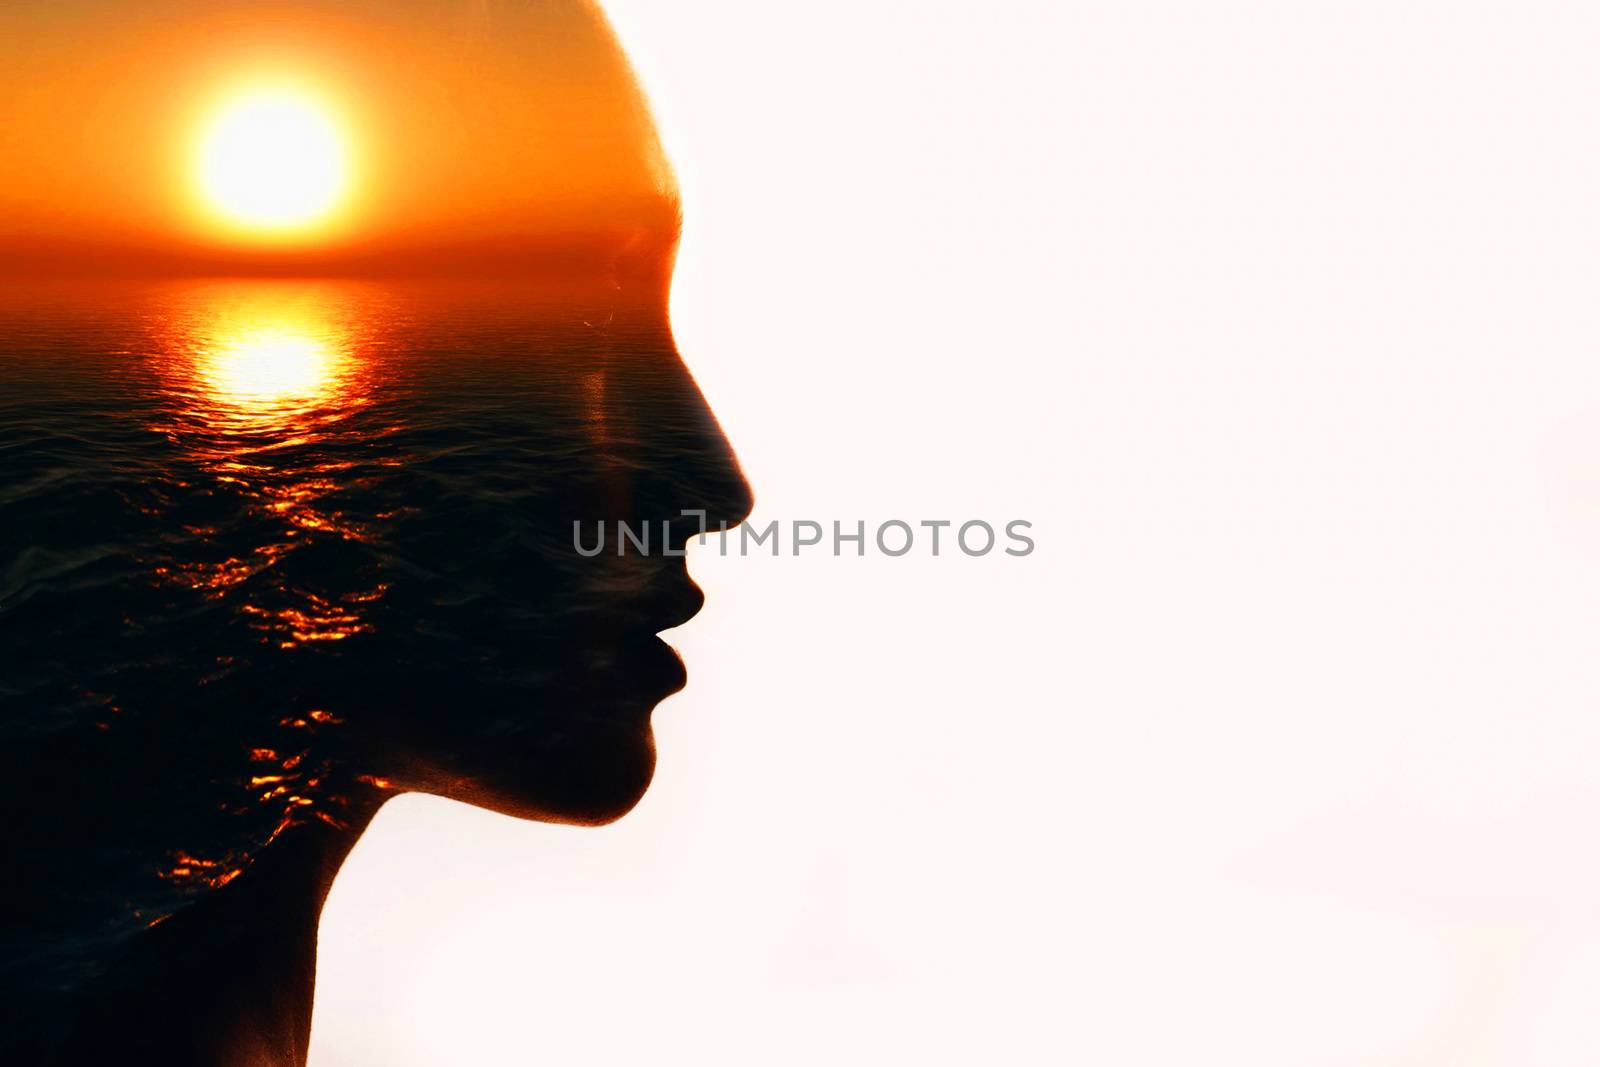 Woman head silhouette with sun inside with copy space. Multiple exposure image.